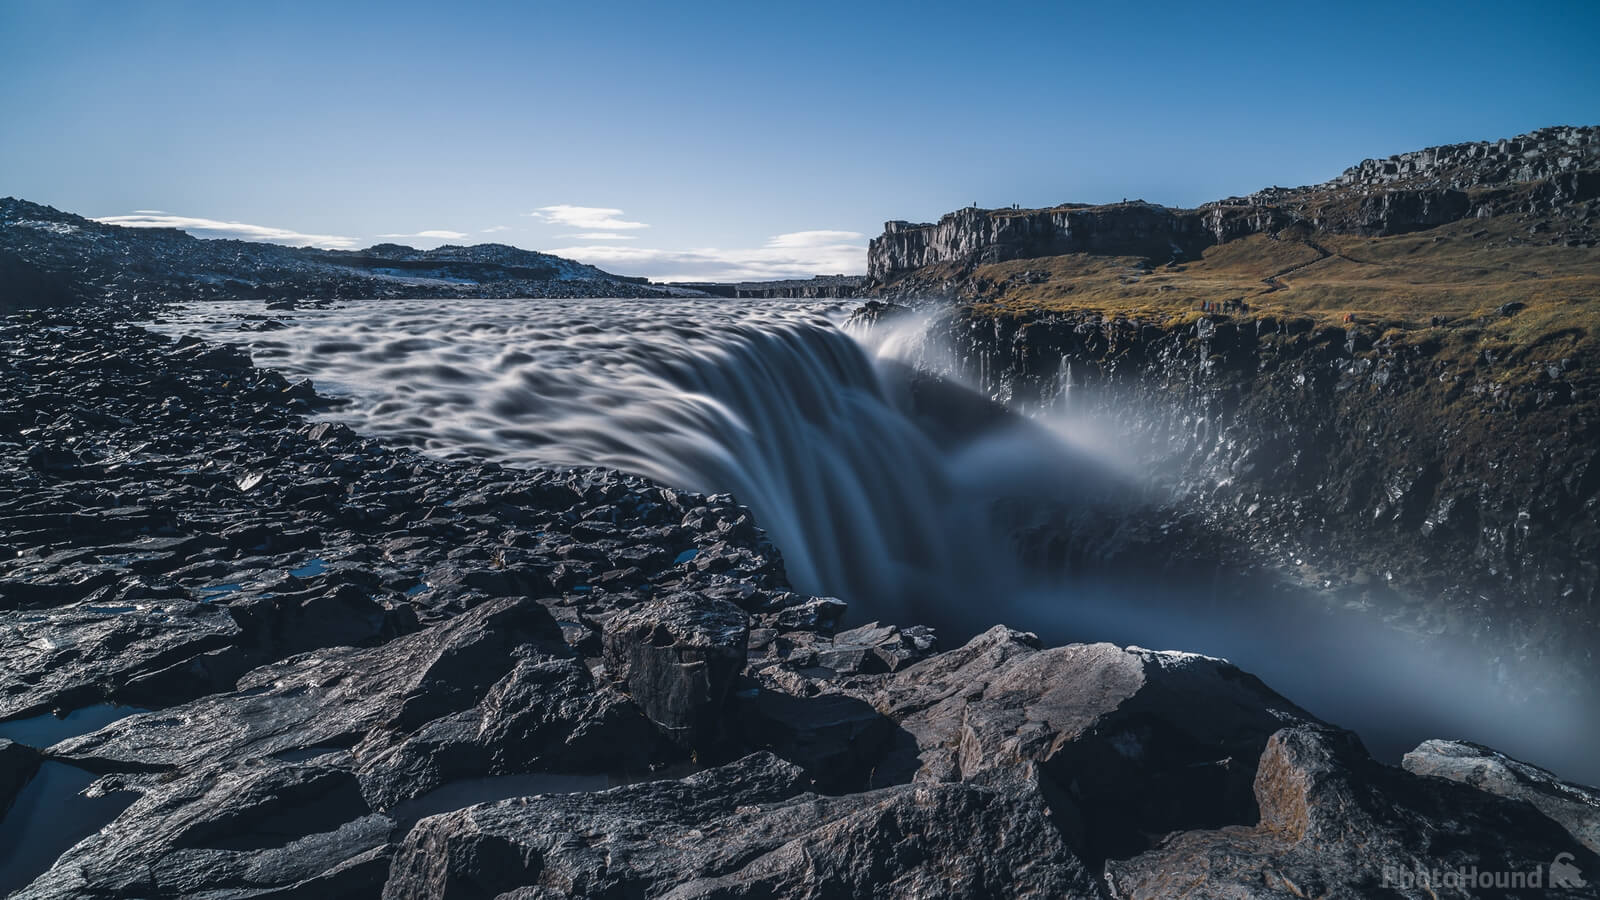 Image of Dettifoss by James Billings.